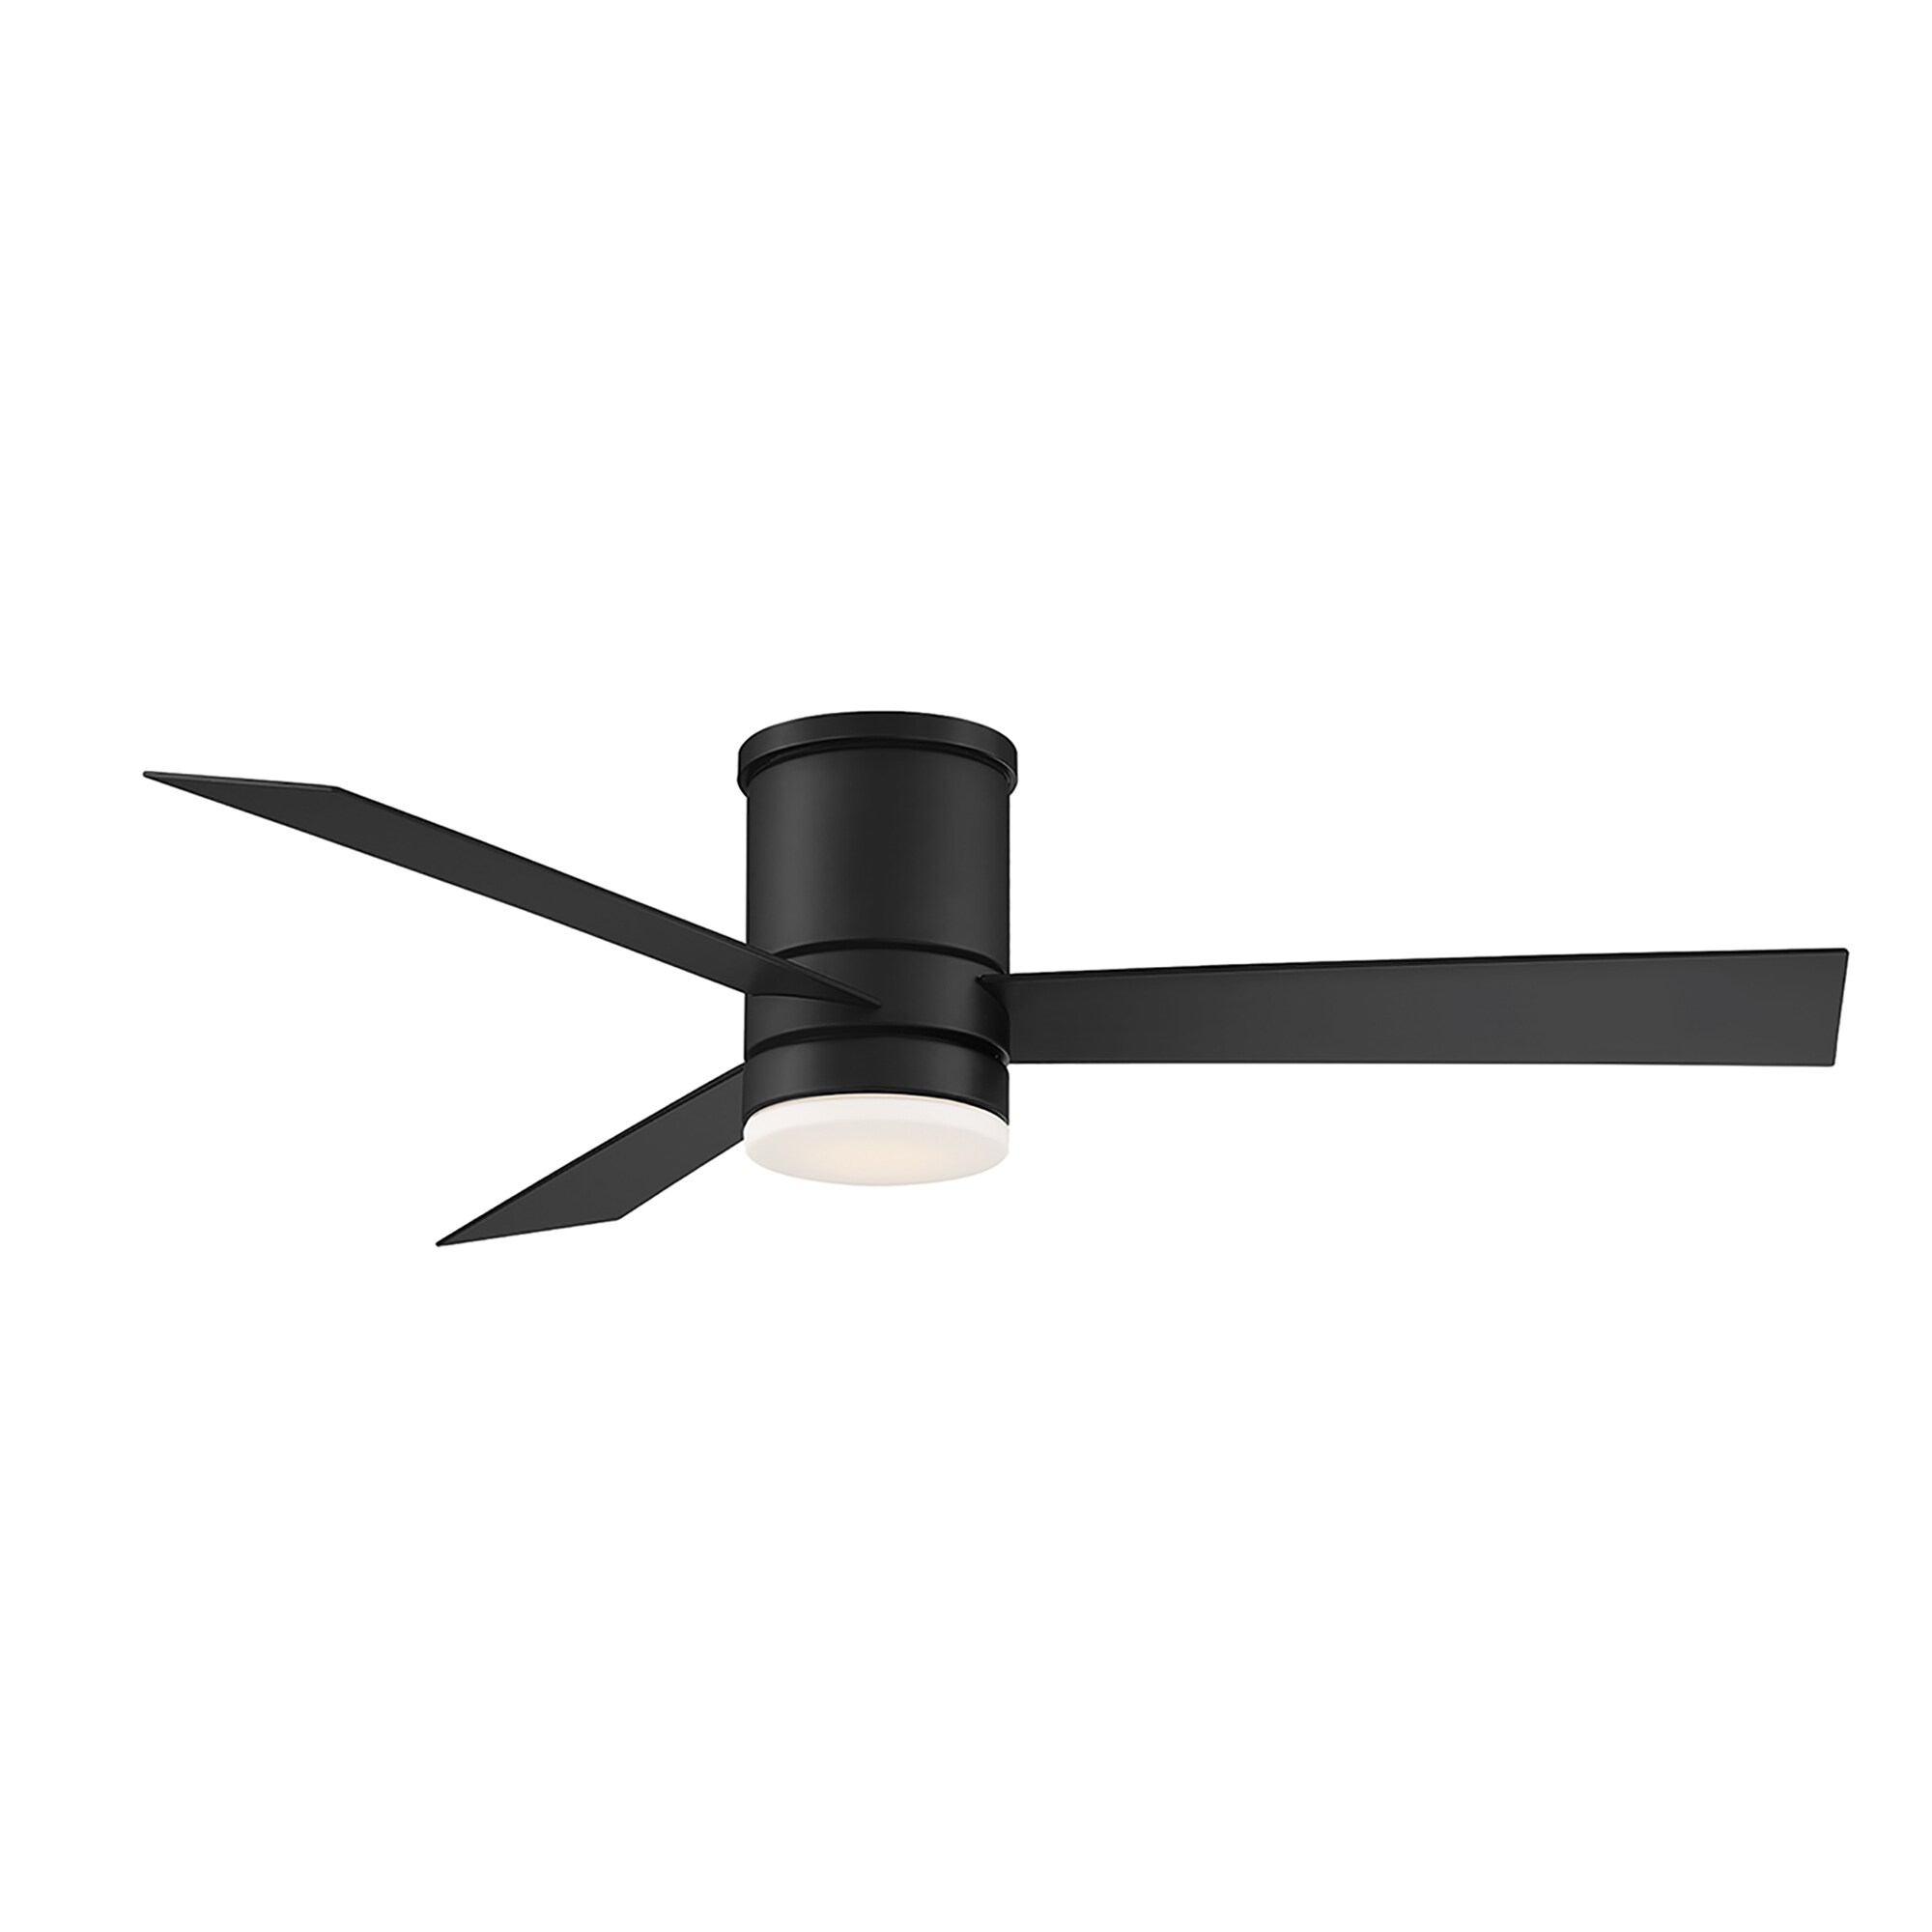 Details about   Rivet Modern Curved Ceiling Fan With Bulb 53"W Brushed Nickel 